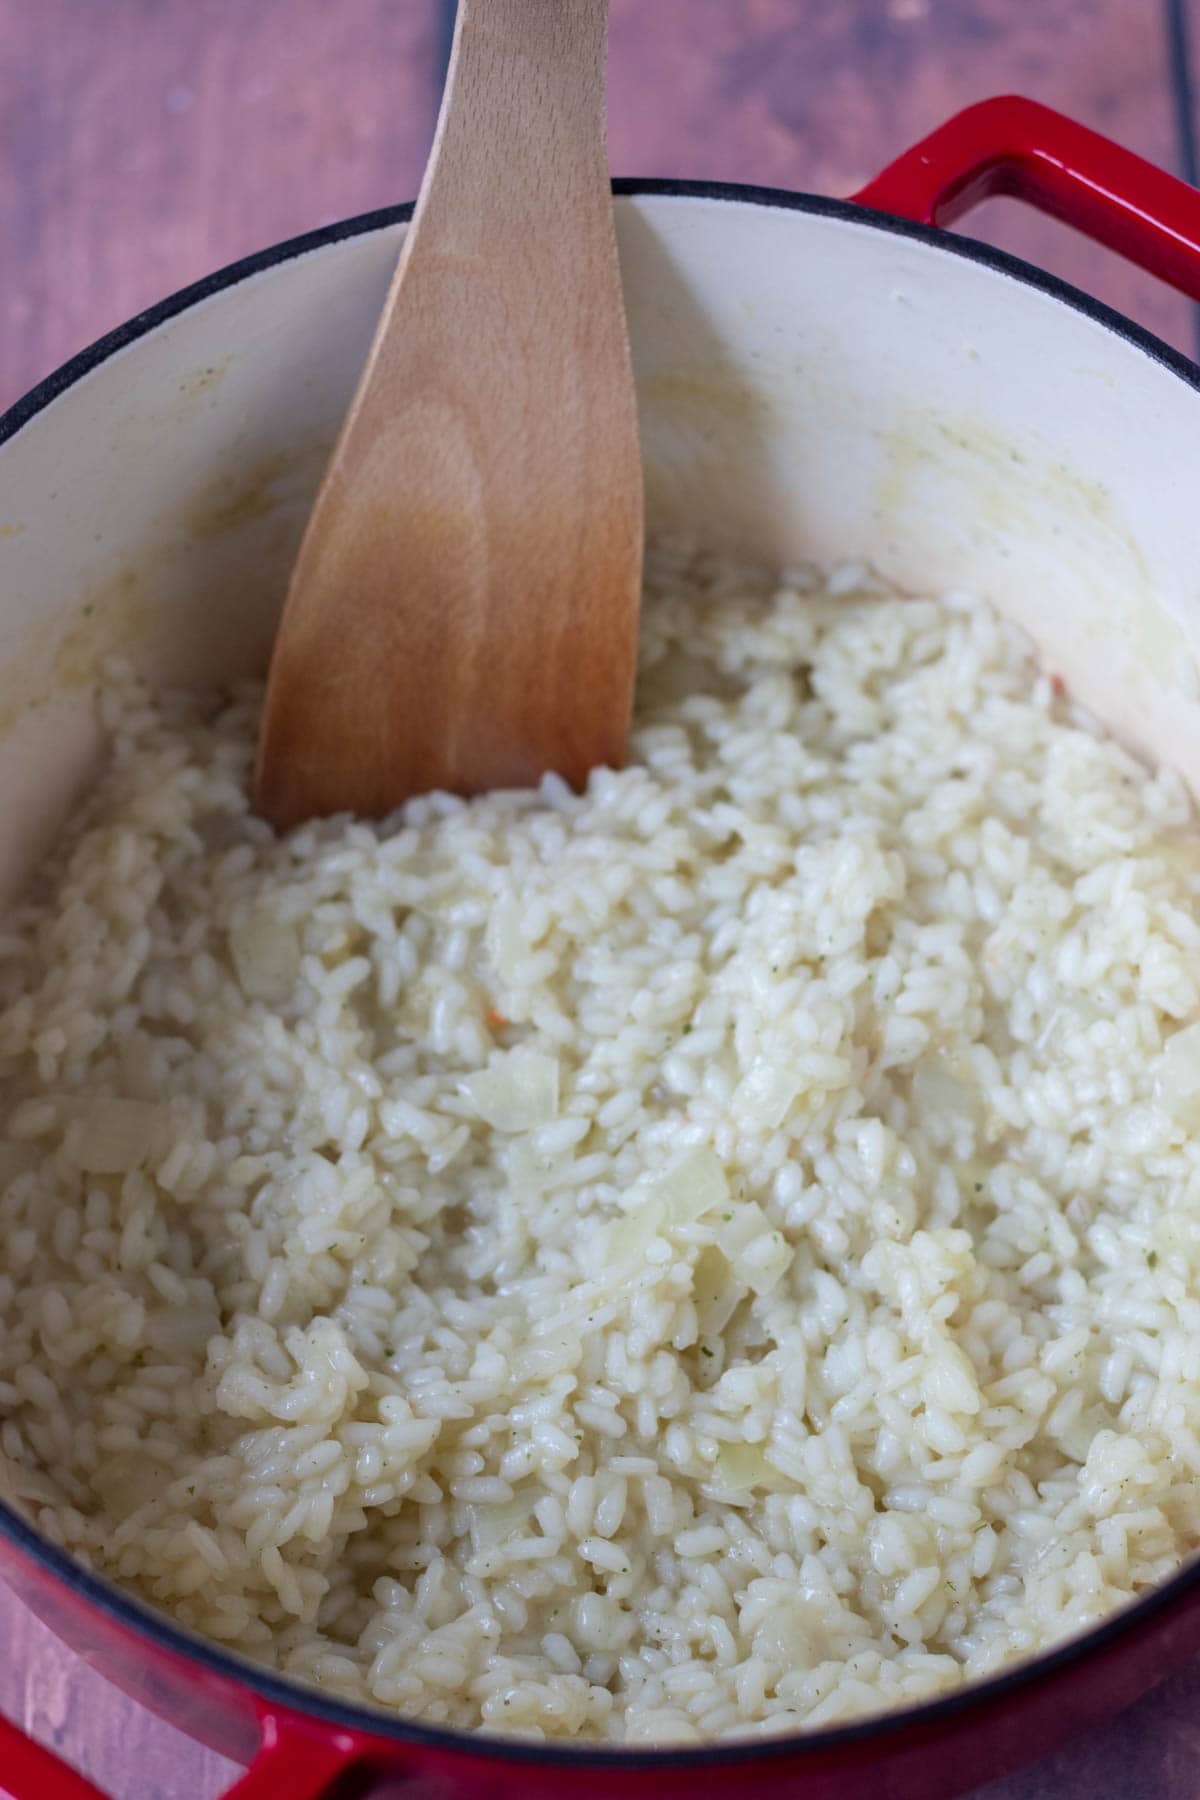 Aborio rice added to sauted onion along with stock and cooked until tender.